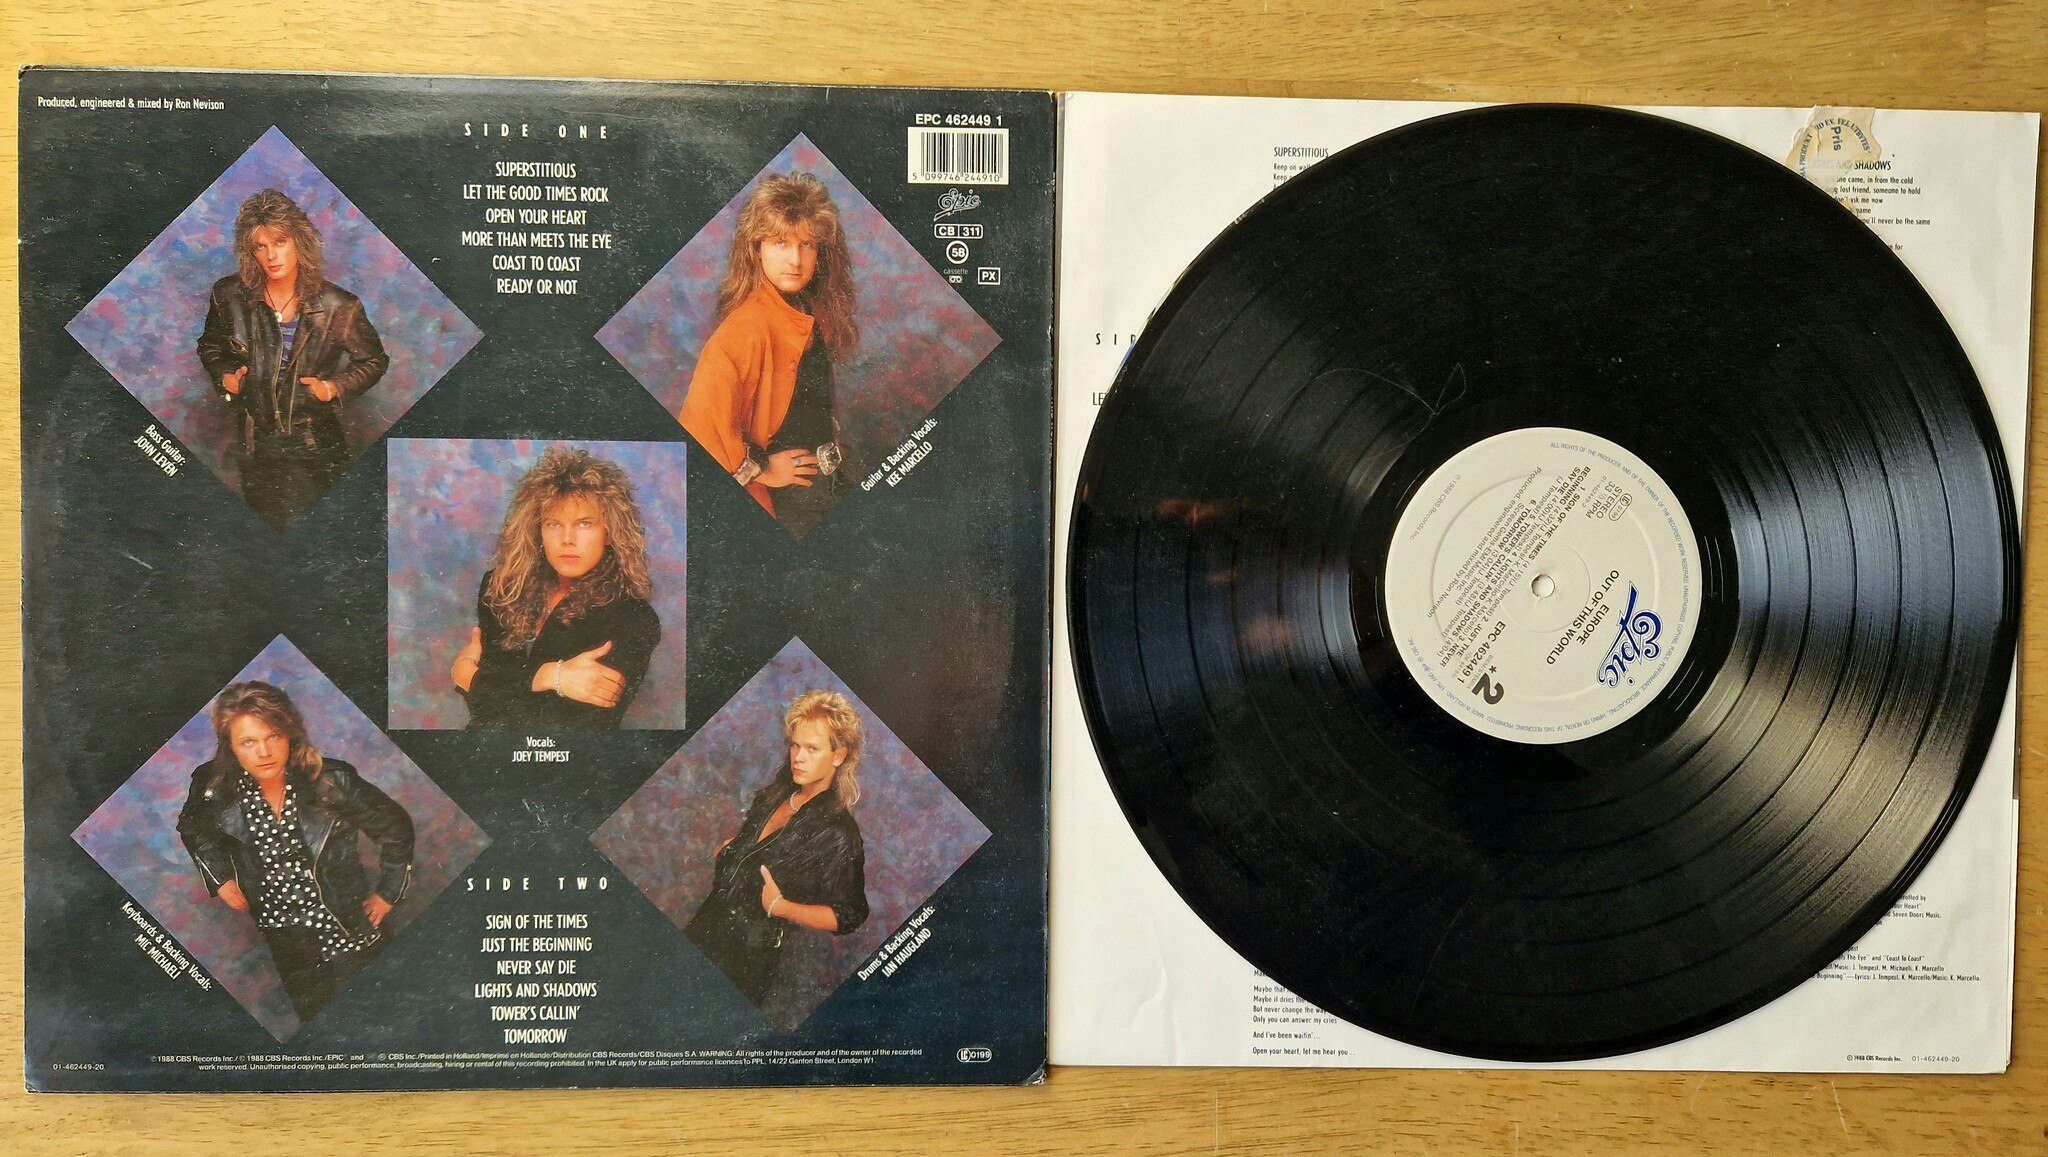 Europe, Out of this world. Vinyl LP